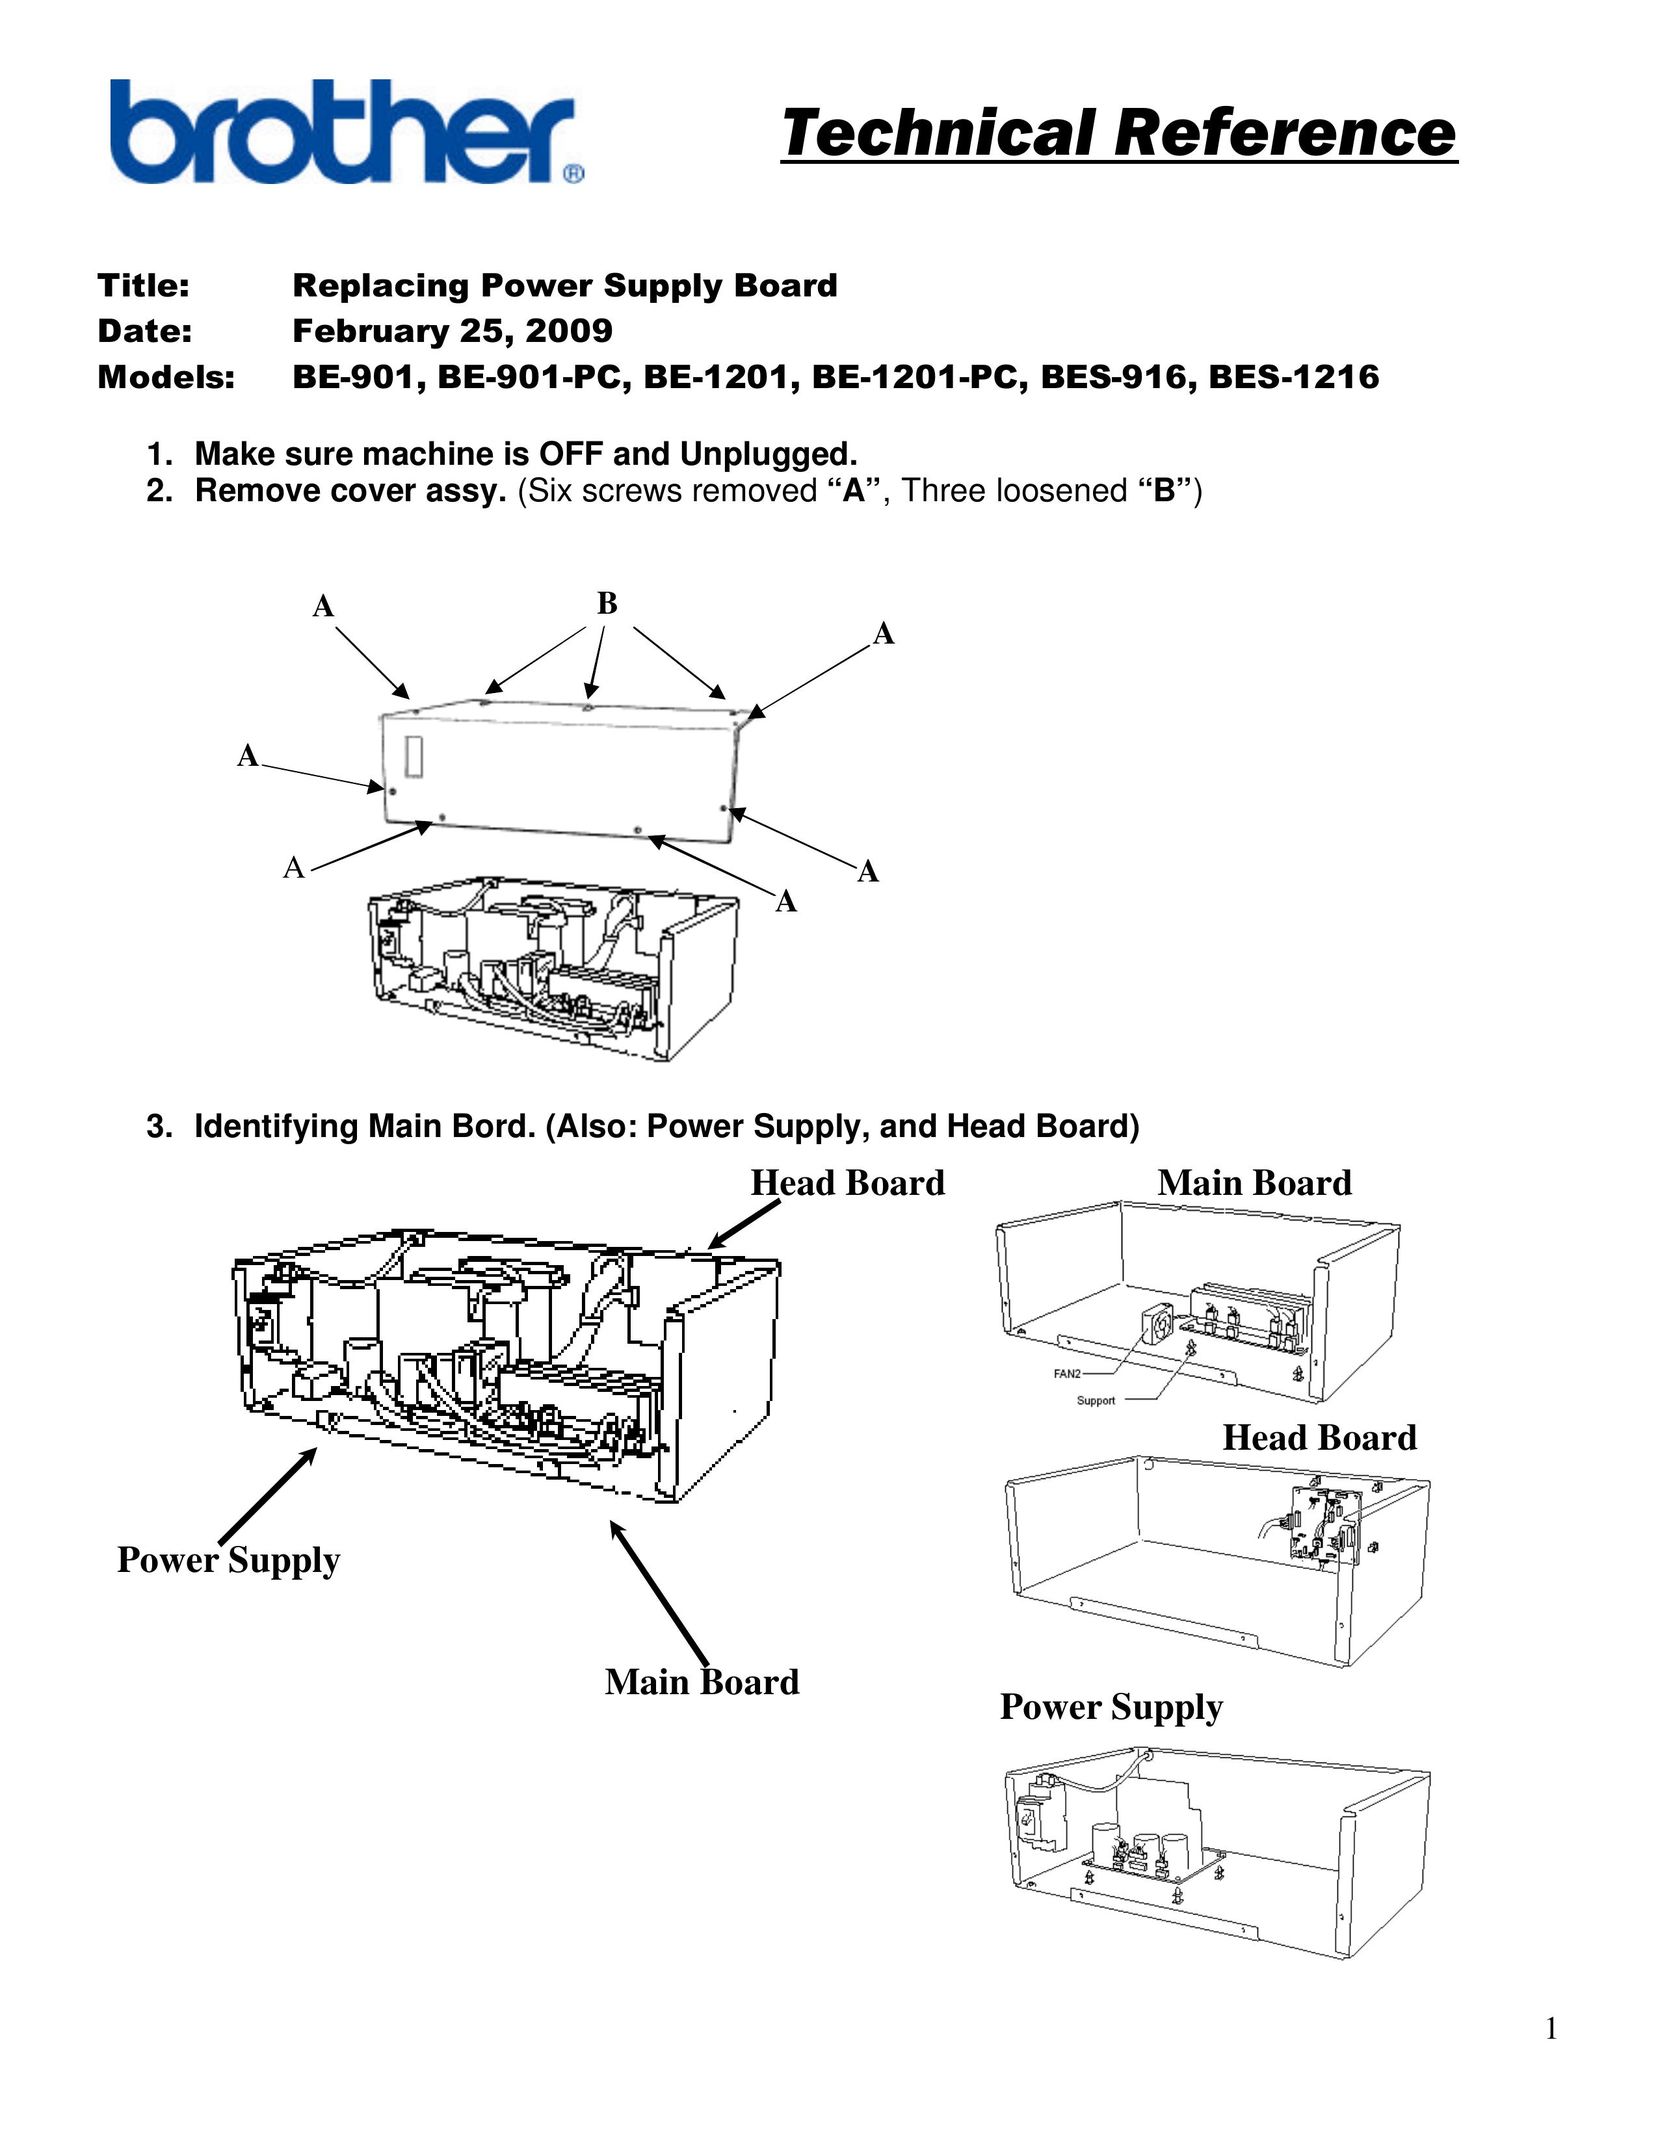 Brother BE-901-PC Power Supply User Manual